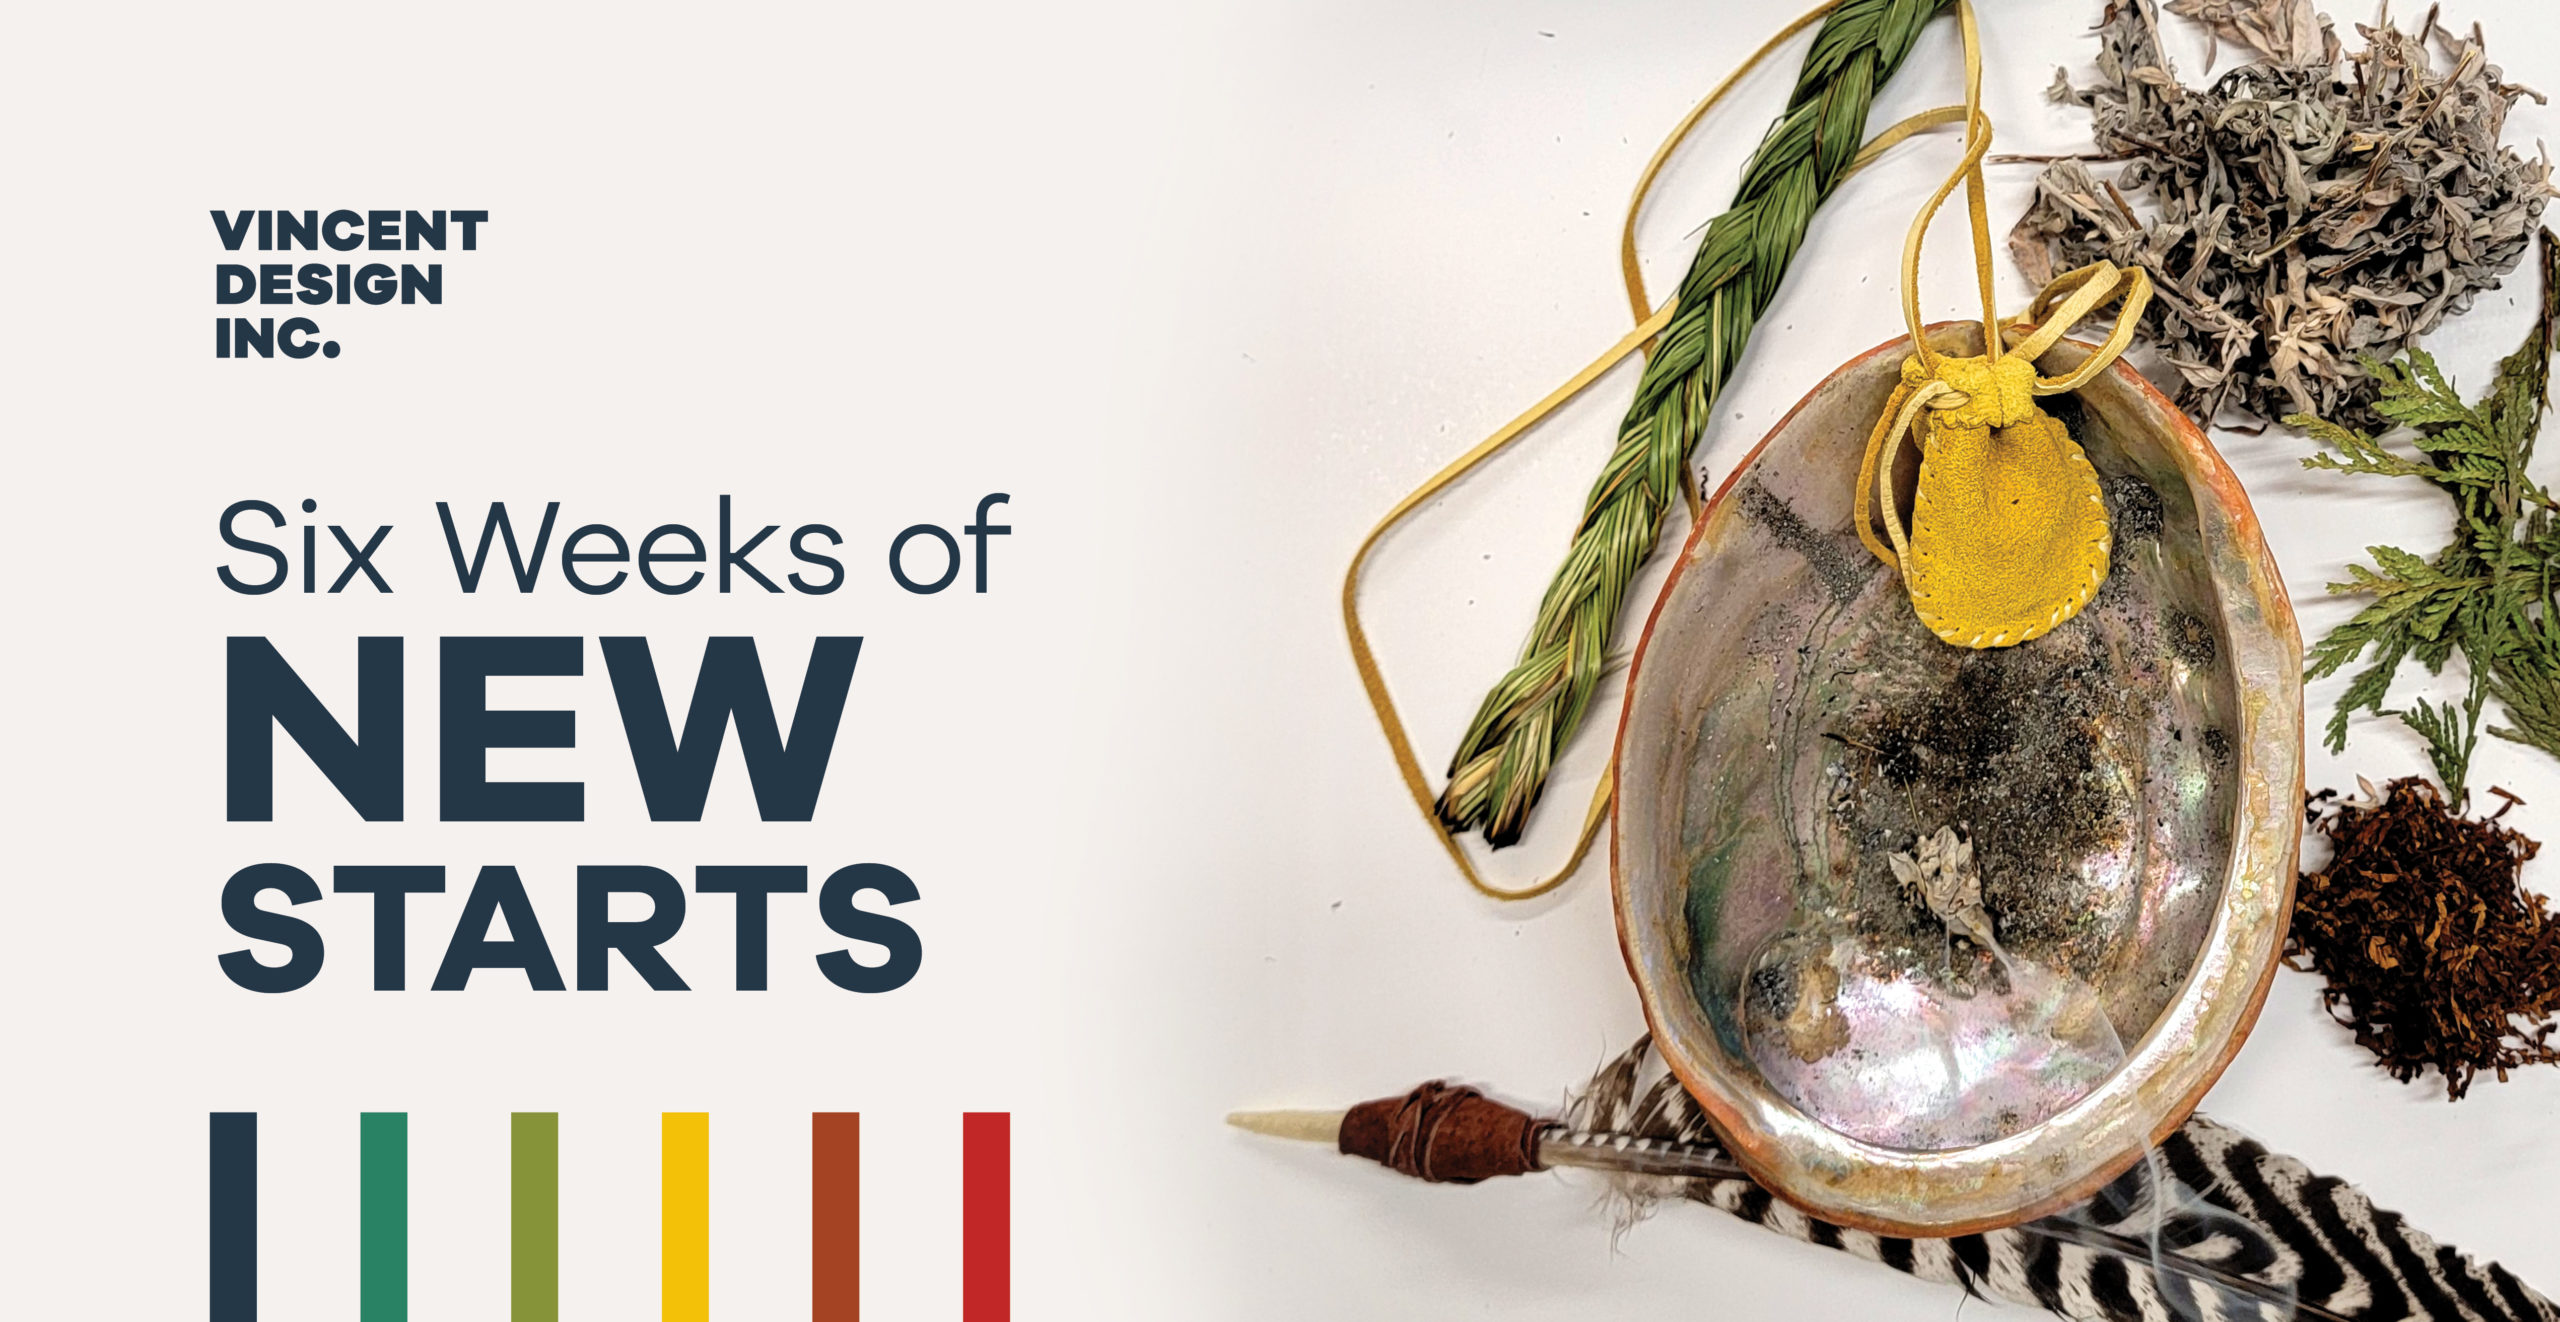 "Six Weeks of New Starts" on image with traditional medicines and smudge bowl